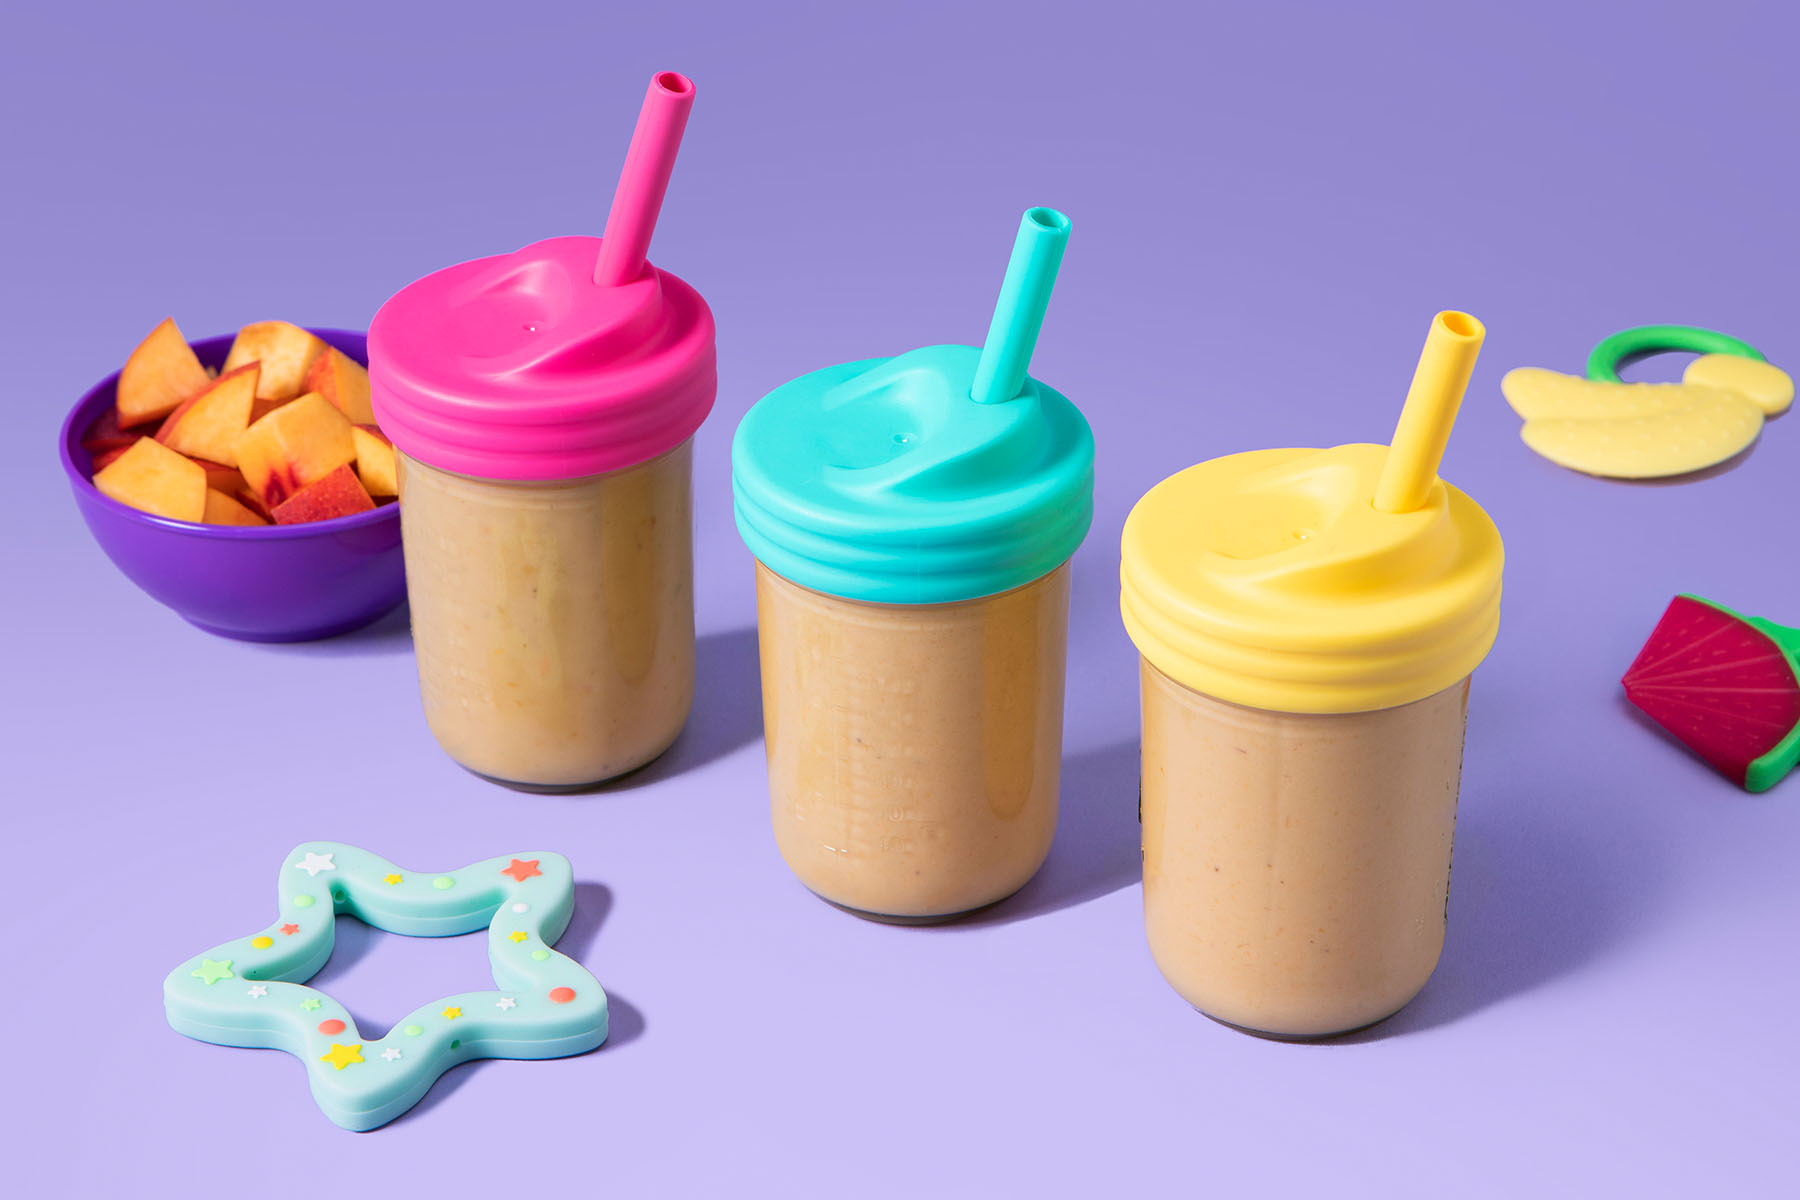 Three peach smoothies in reusable cups with a bowl of cut up peaches and toys